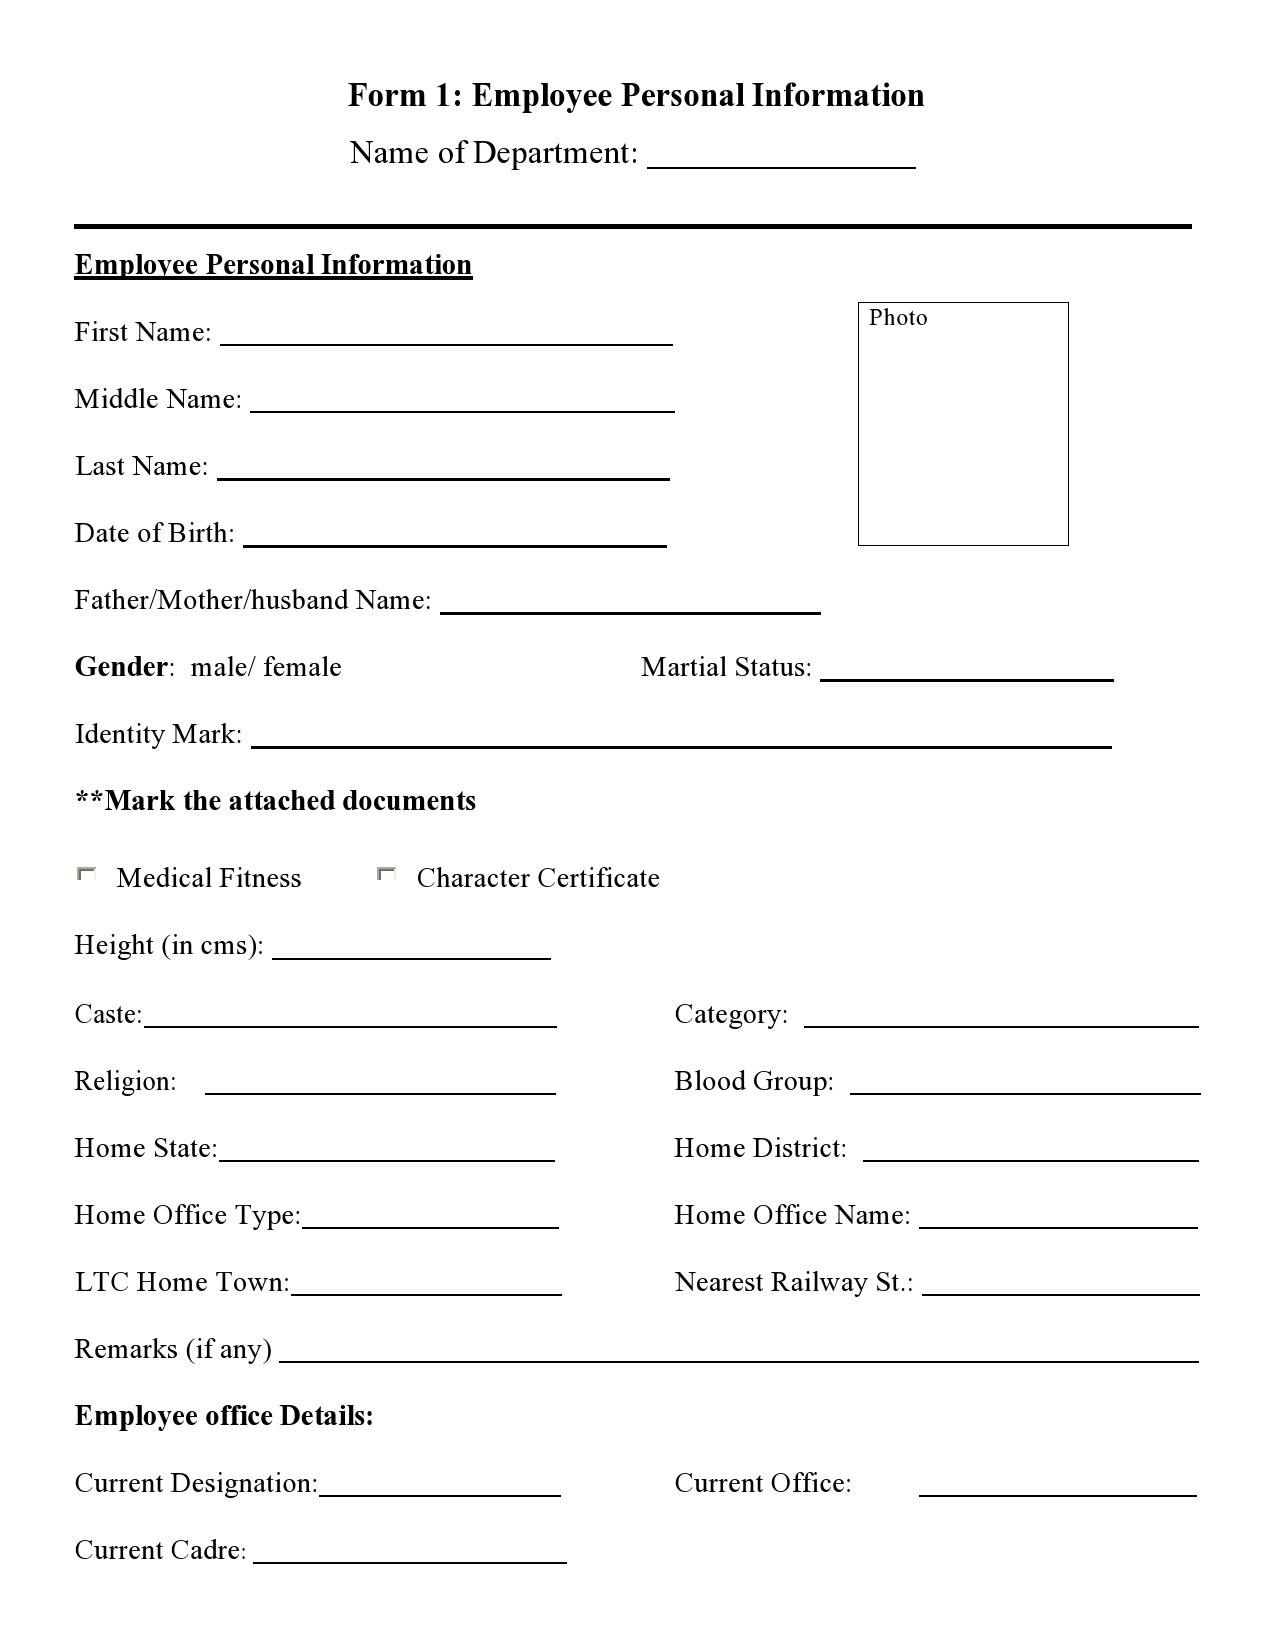 Free personal information form 09